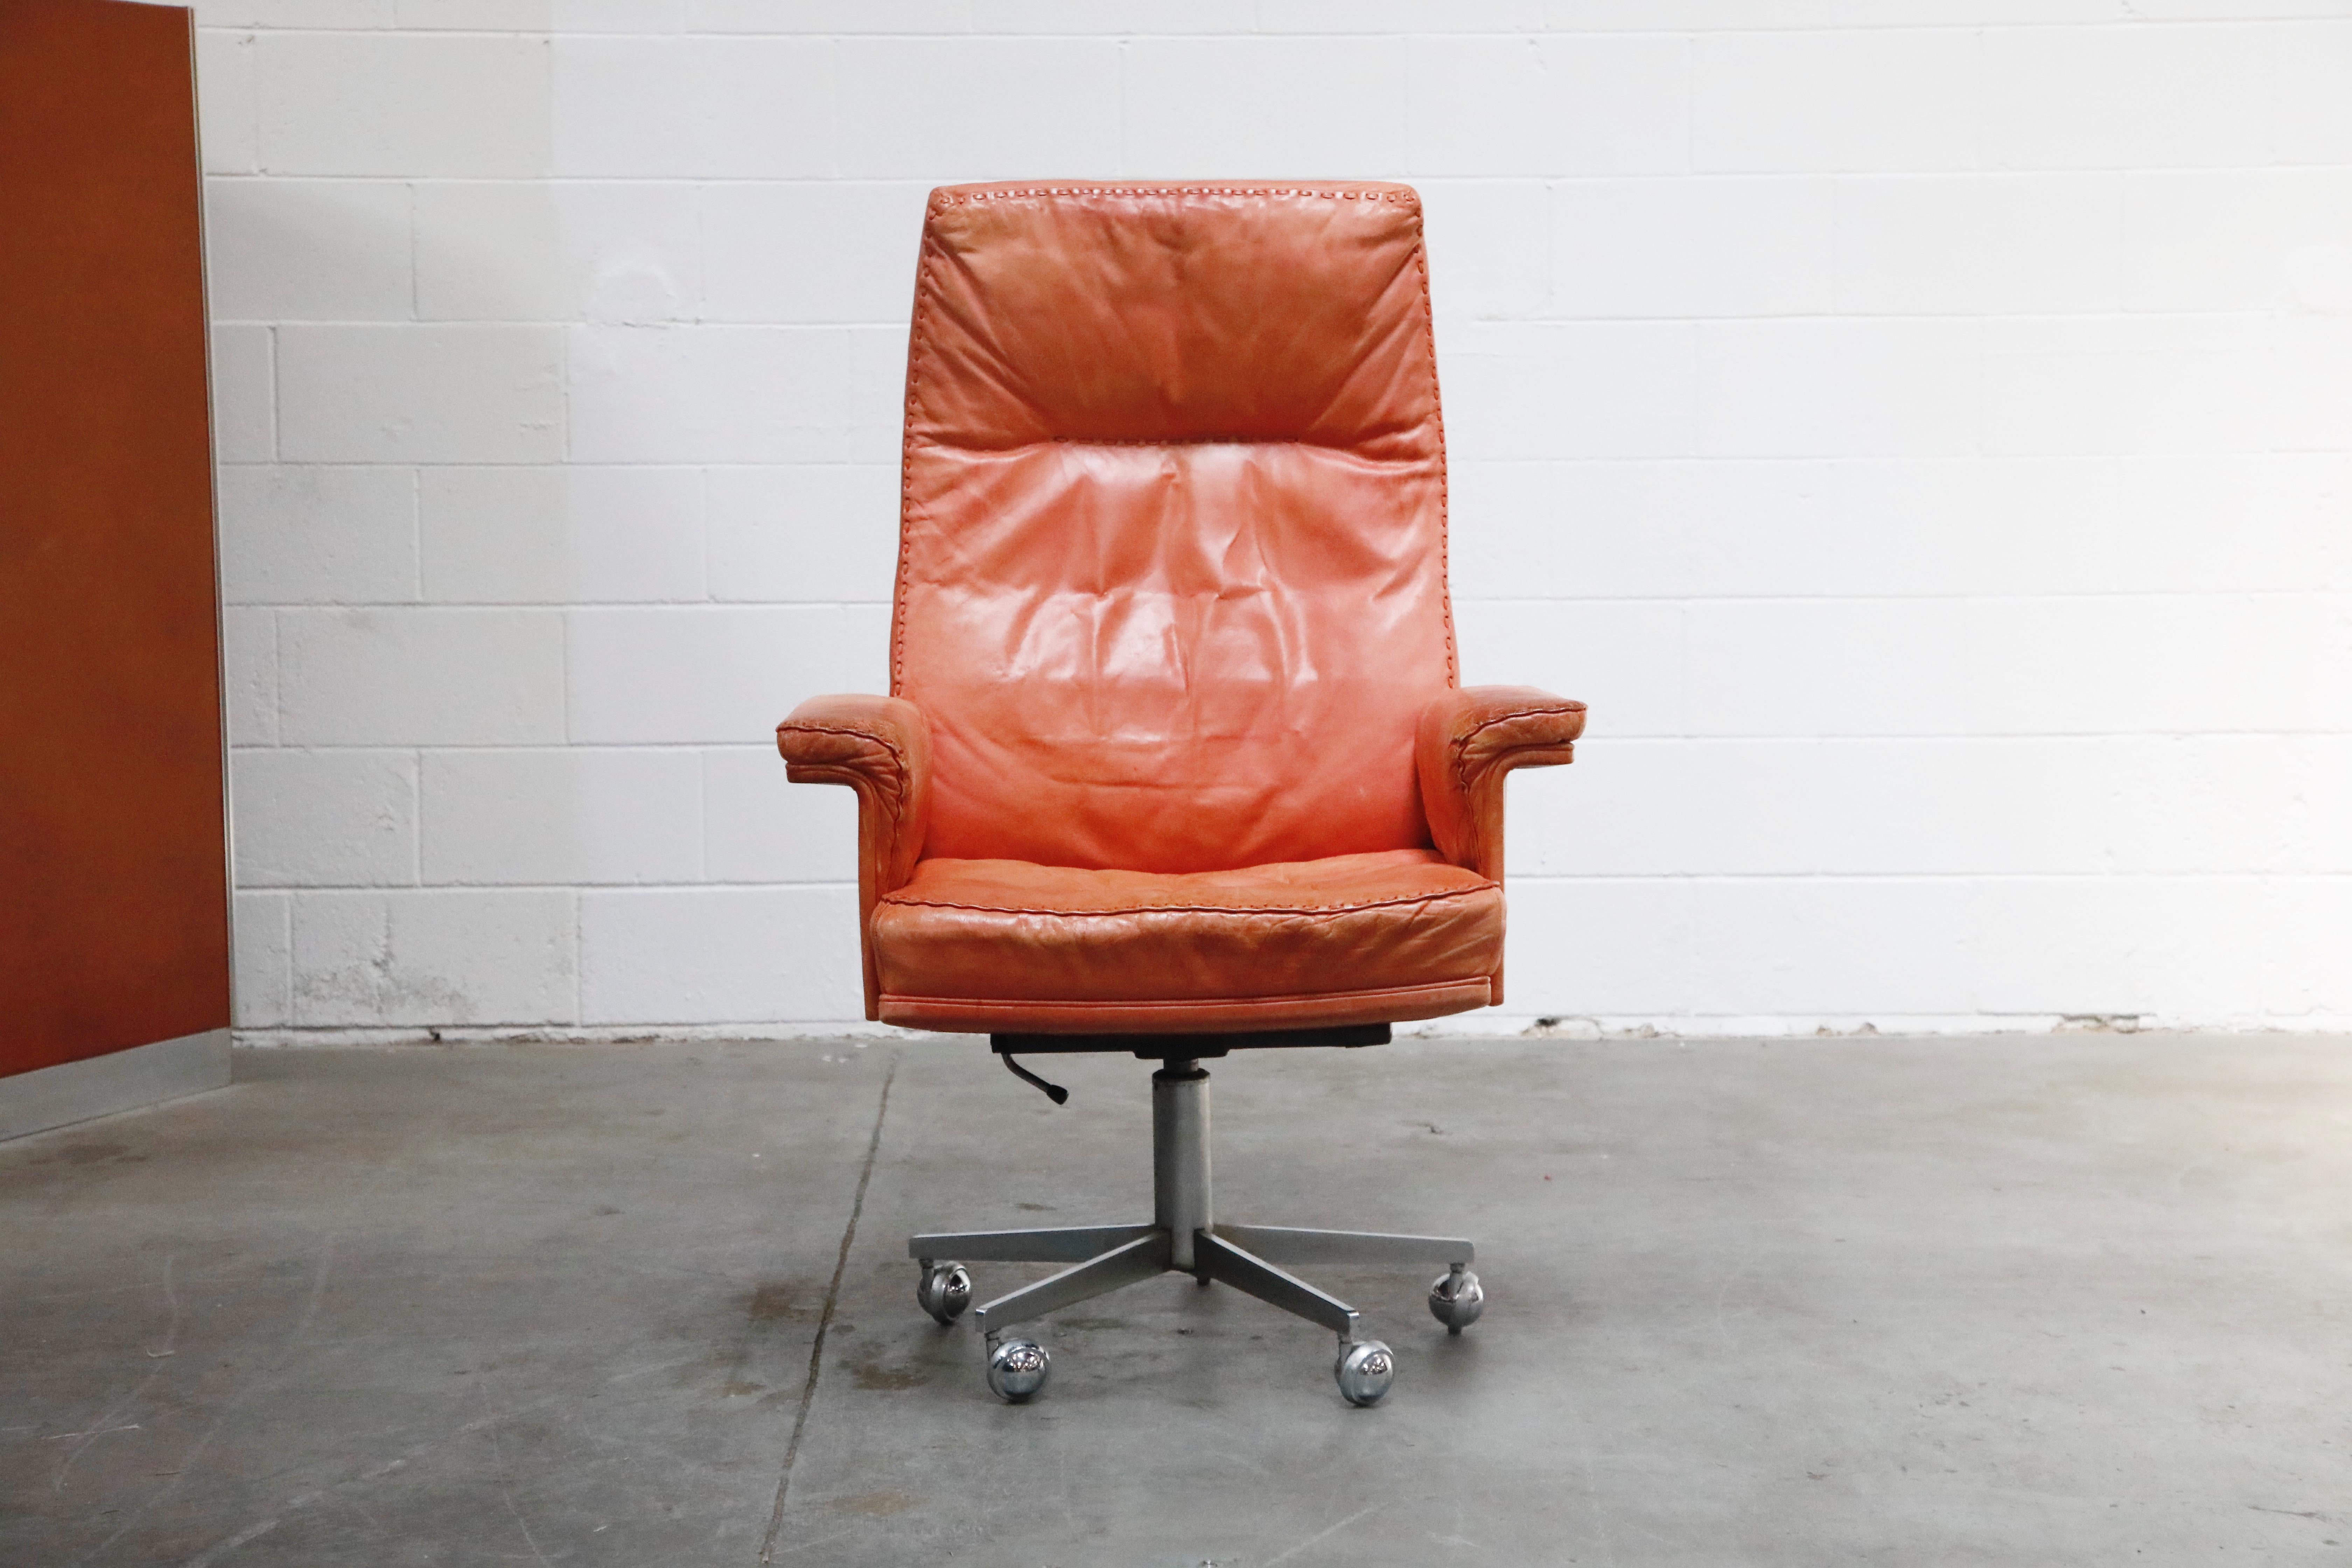 Beautiful distressed leather on this vintage De Sede DS35 highback executive desk chair on casters. This incredible office chair features an extremely comfortable form, burnt orange color aniline leather upholstery with whipstitch edge detail,